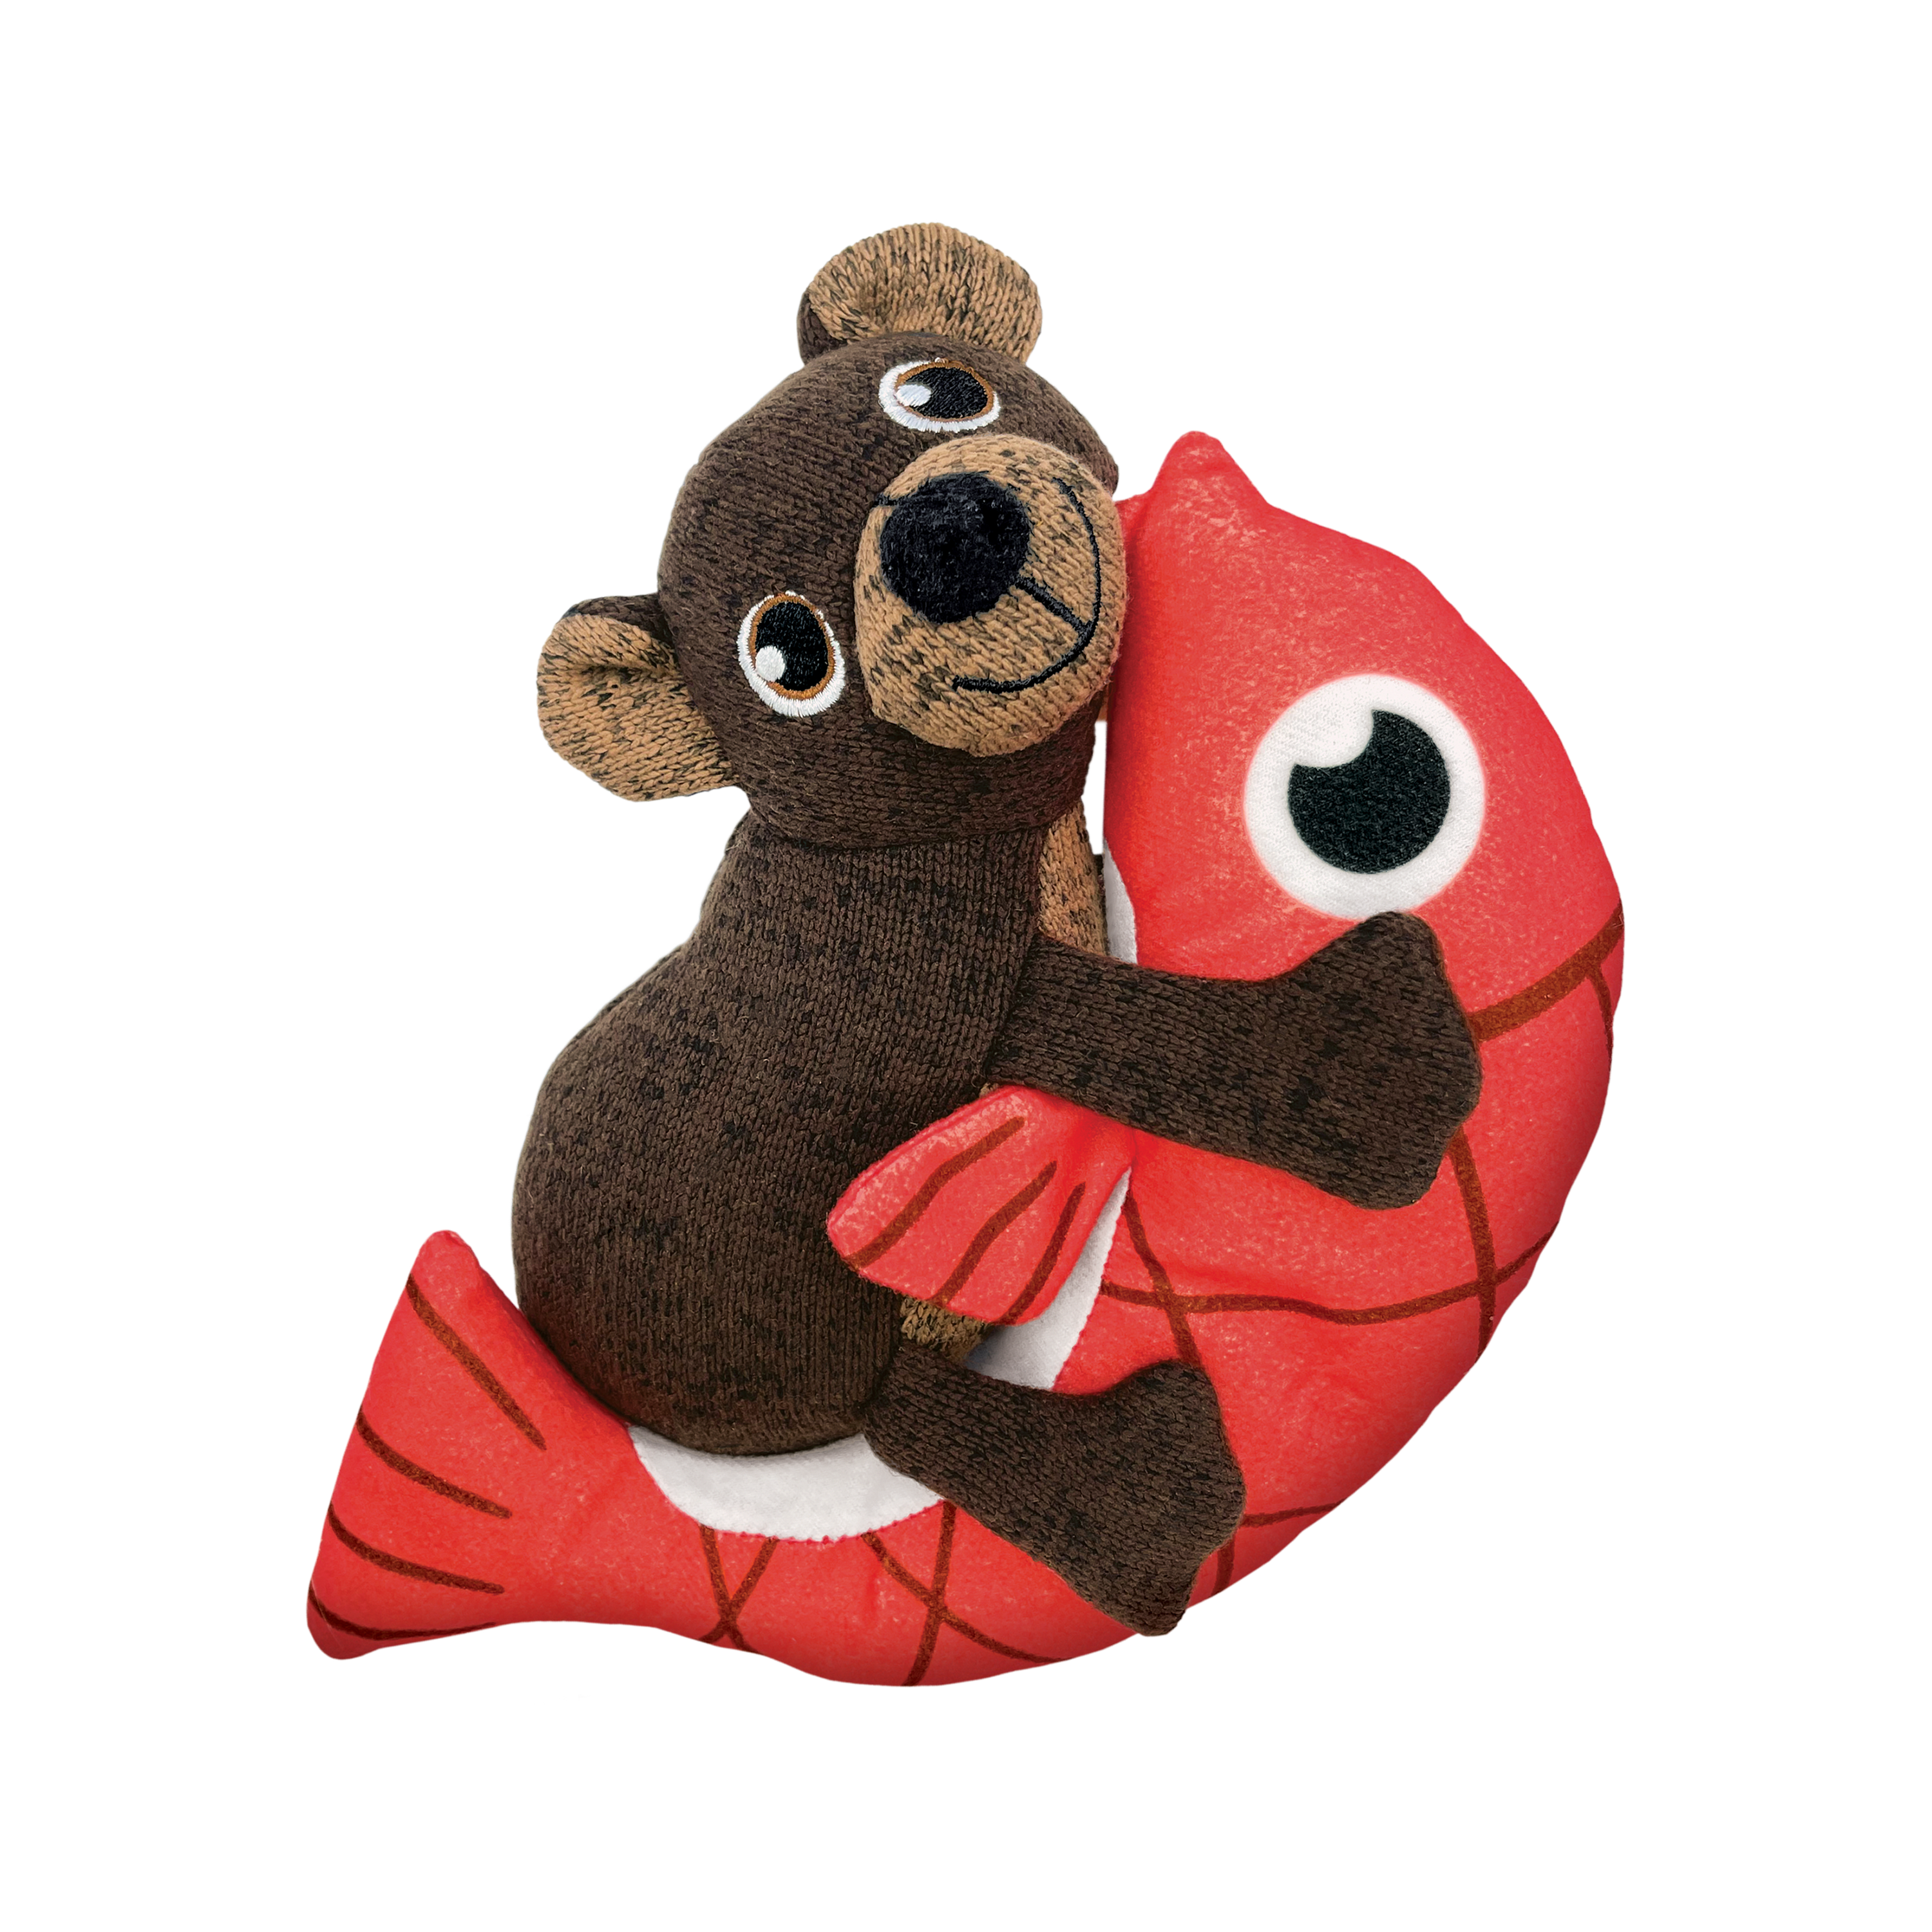 Pull-A-Partz Pals Bear offpack product image